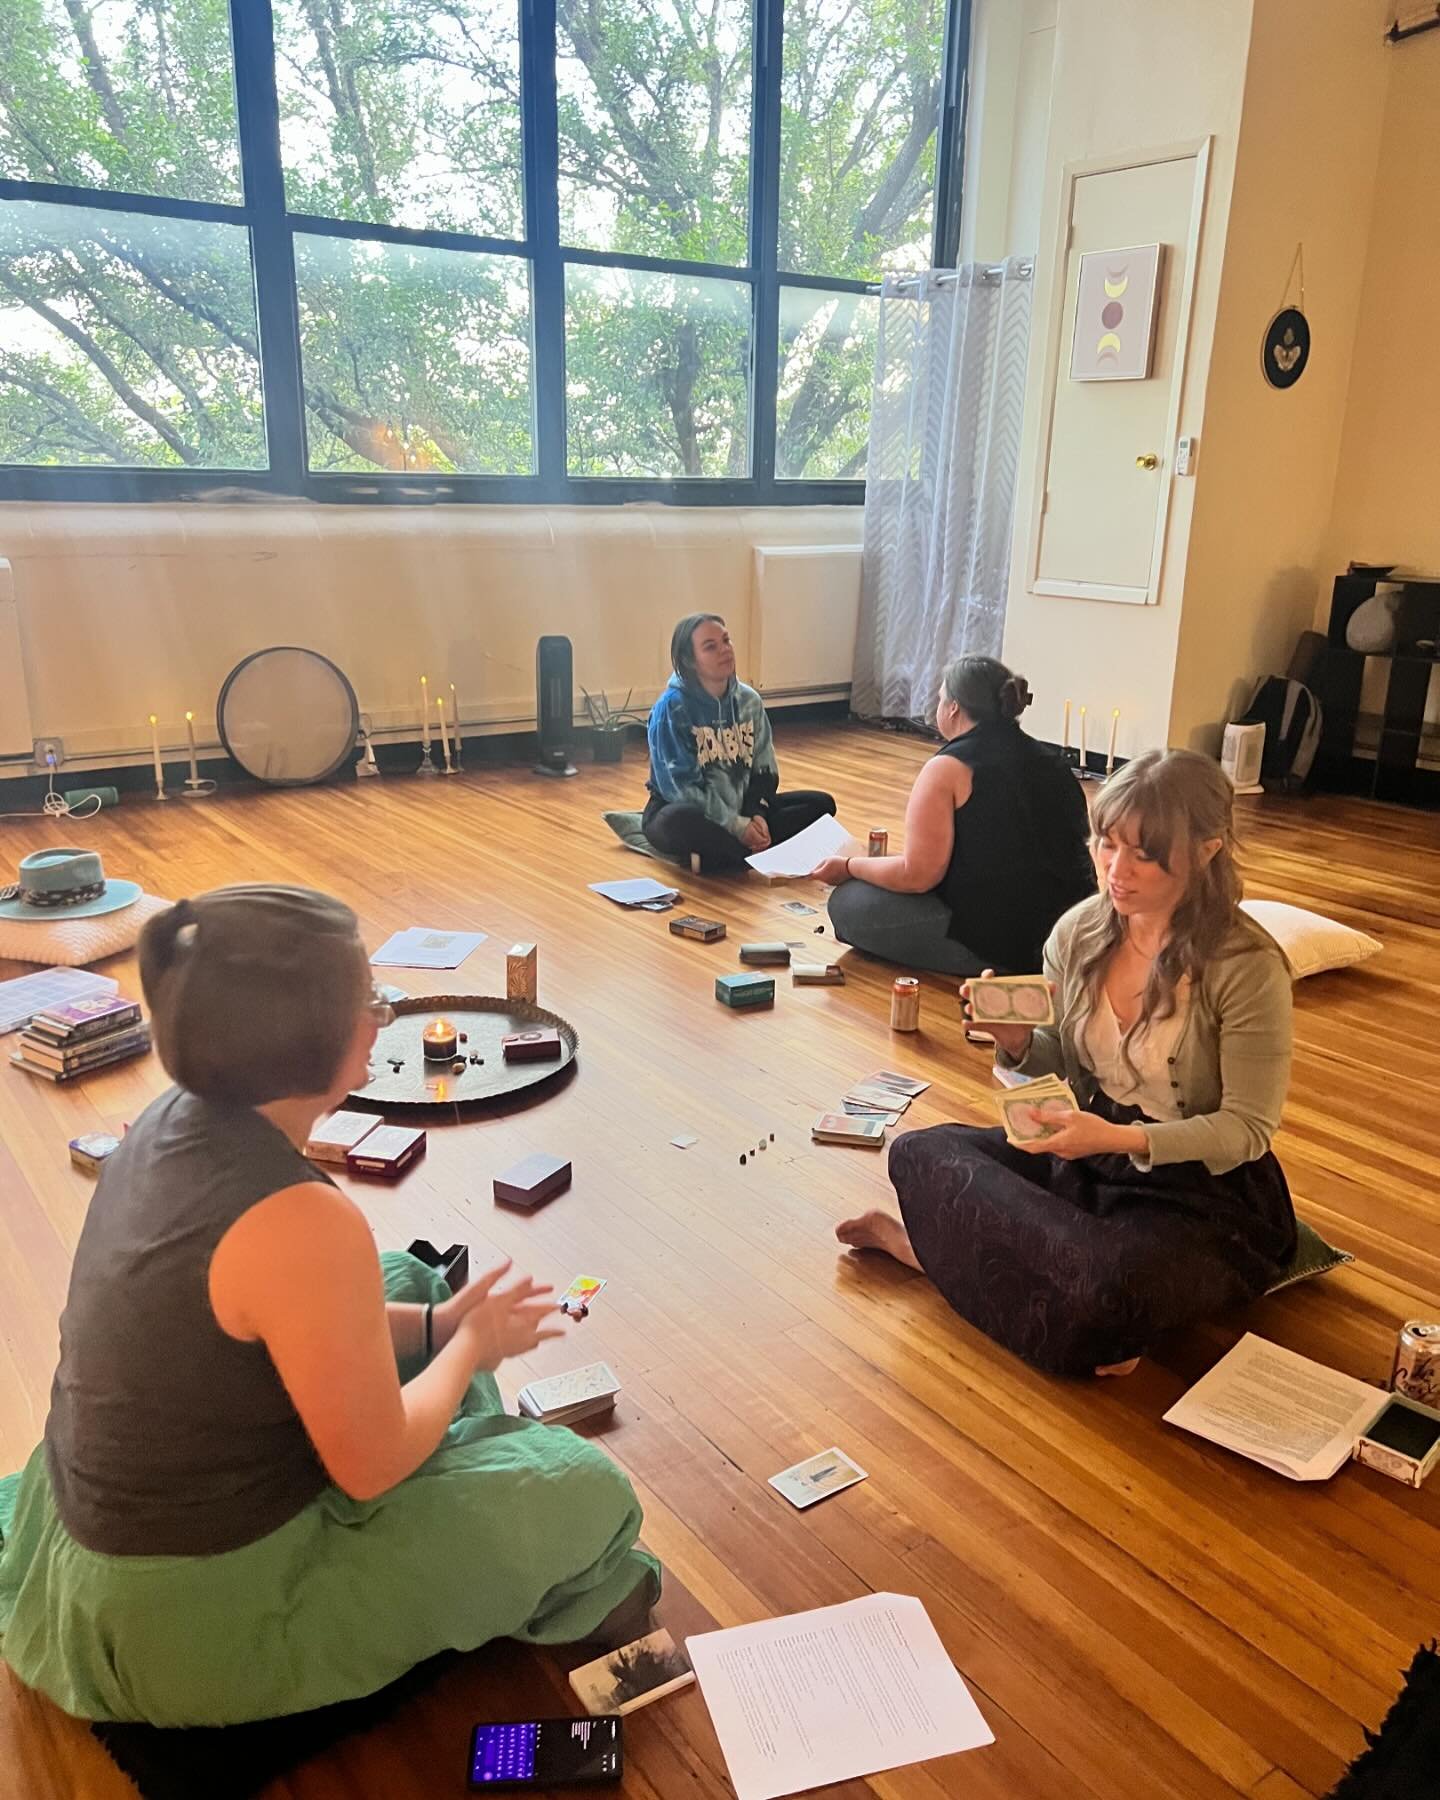 Magical evening shared with such an intuitive group @mindfulmuse.yoga 
Thanks for letting me lead my intuition and tarot workshop. Can&rsquo;t wait to share more experiences in the community! 🎴🤍🔮🌑🦋